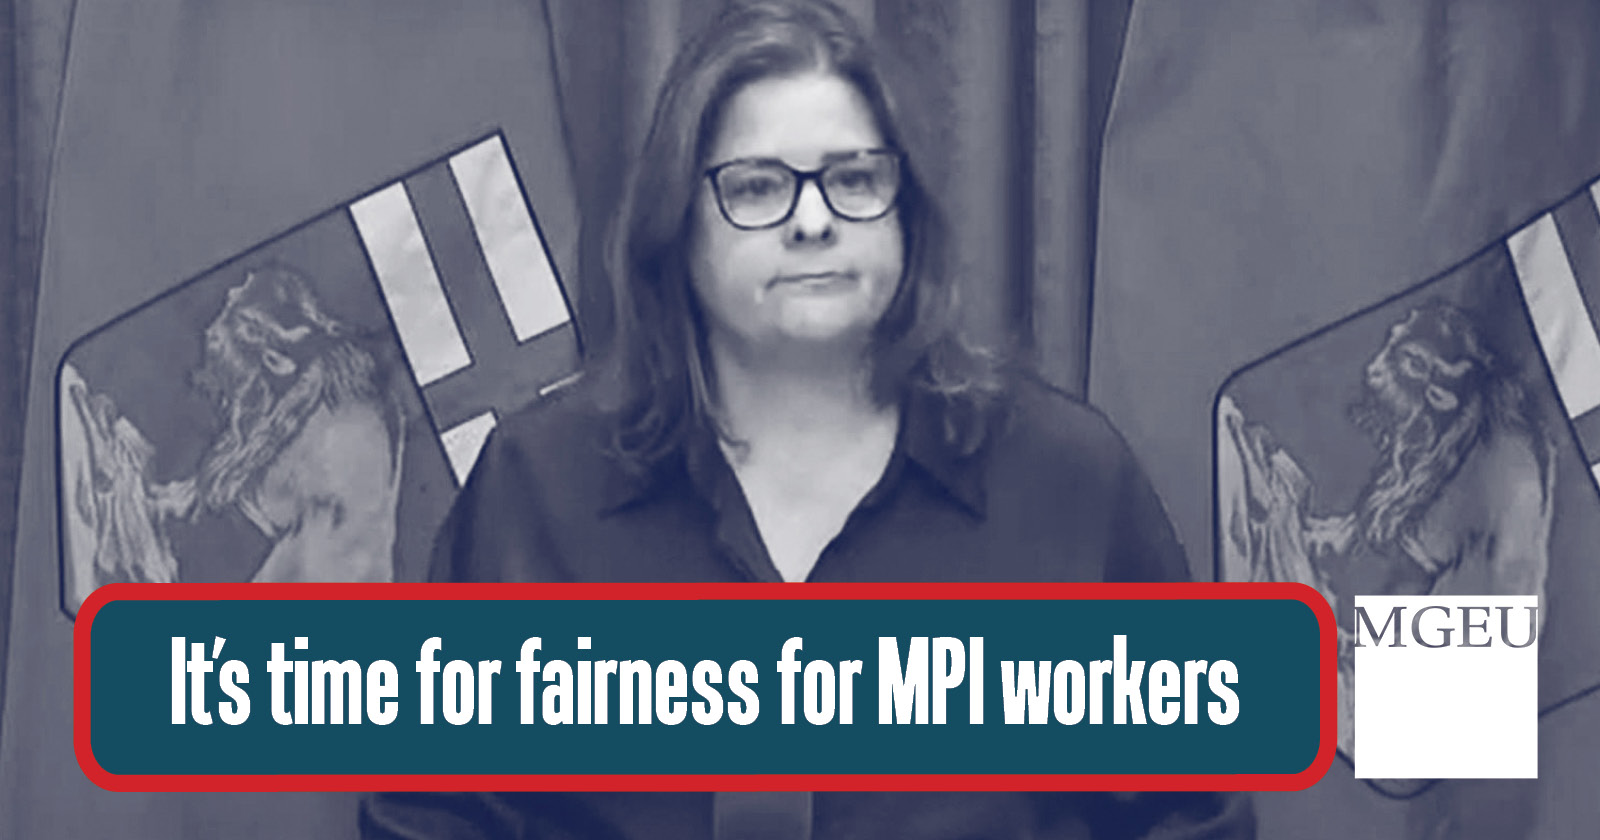 2023-09-11-fairness-for-mpi-workers-share.jpg (189 KB)